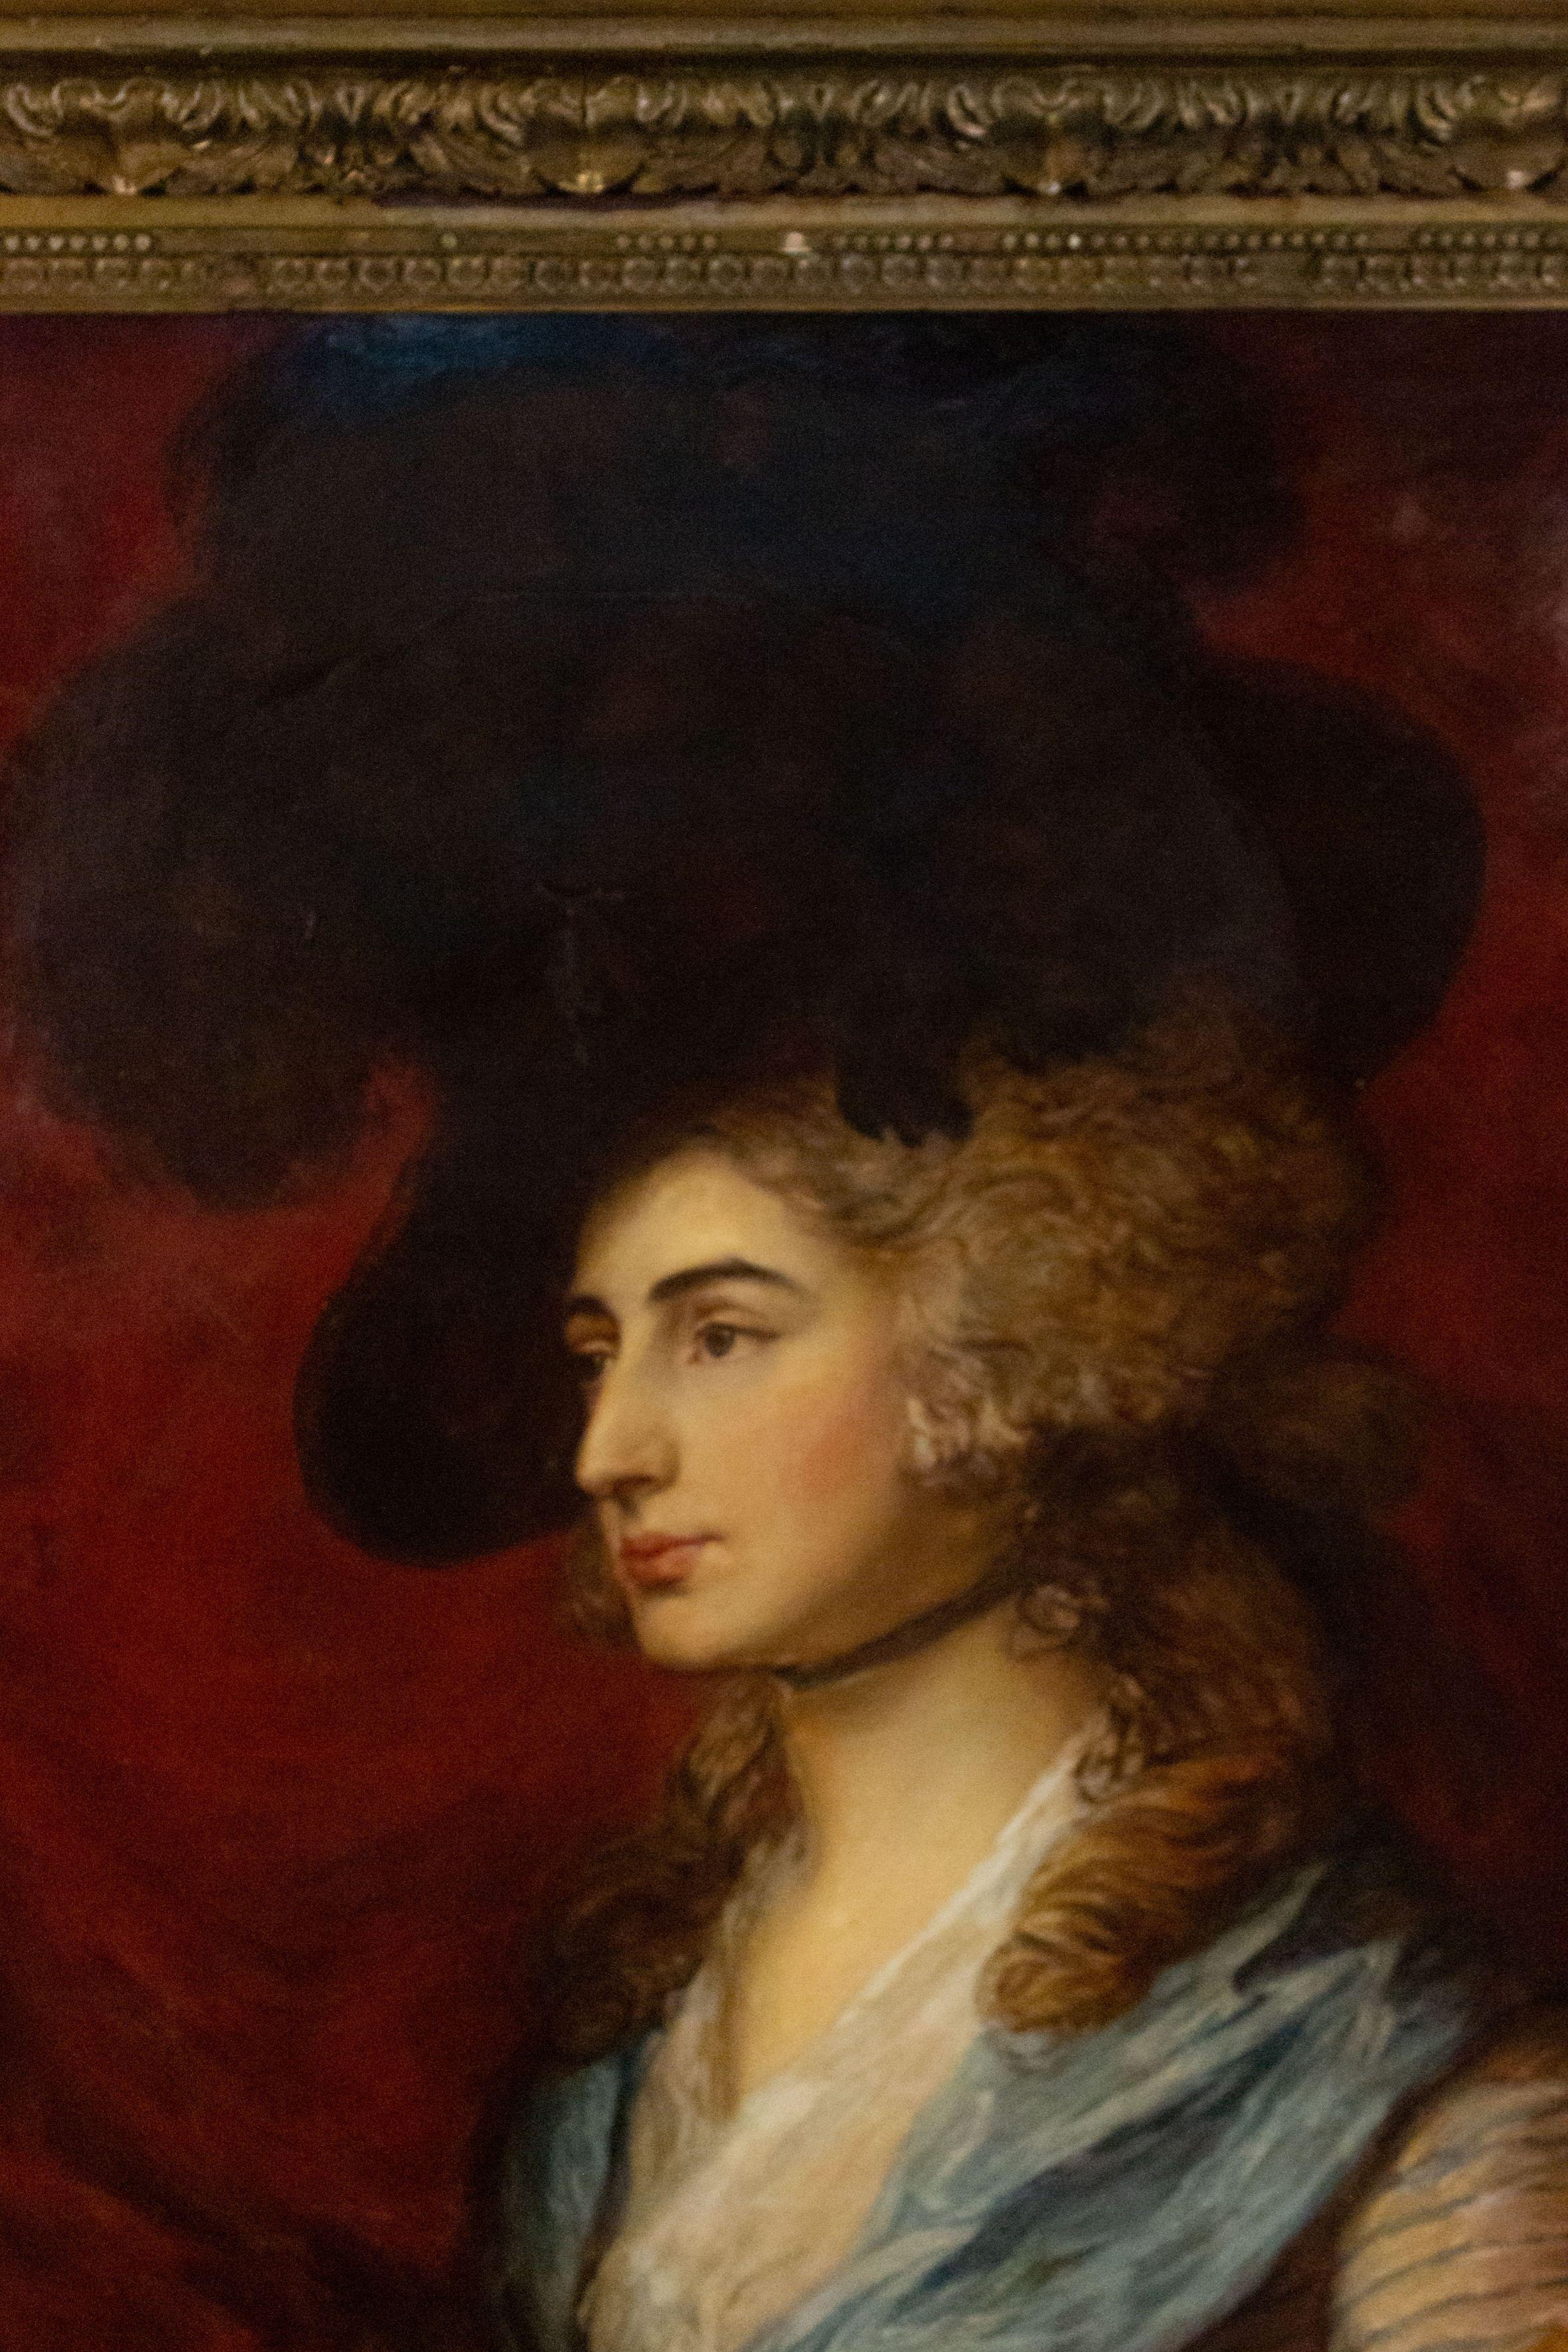 19th century gilt framed oil painting portrait of lady wearing black hat and blue striped dress.
 